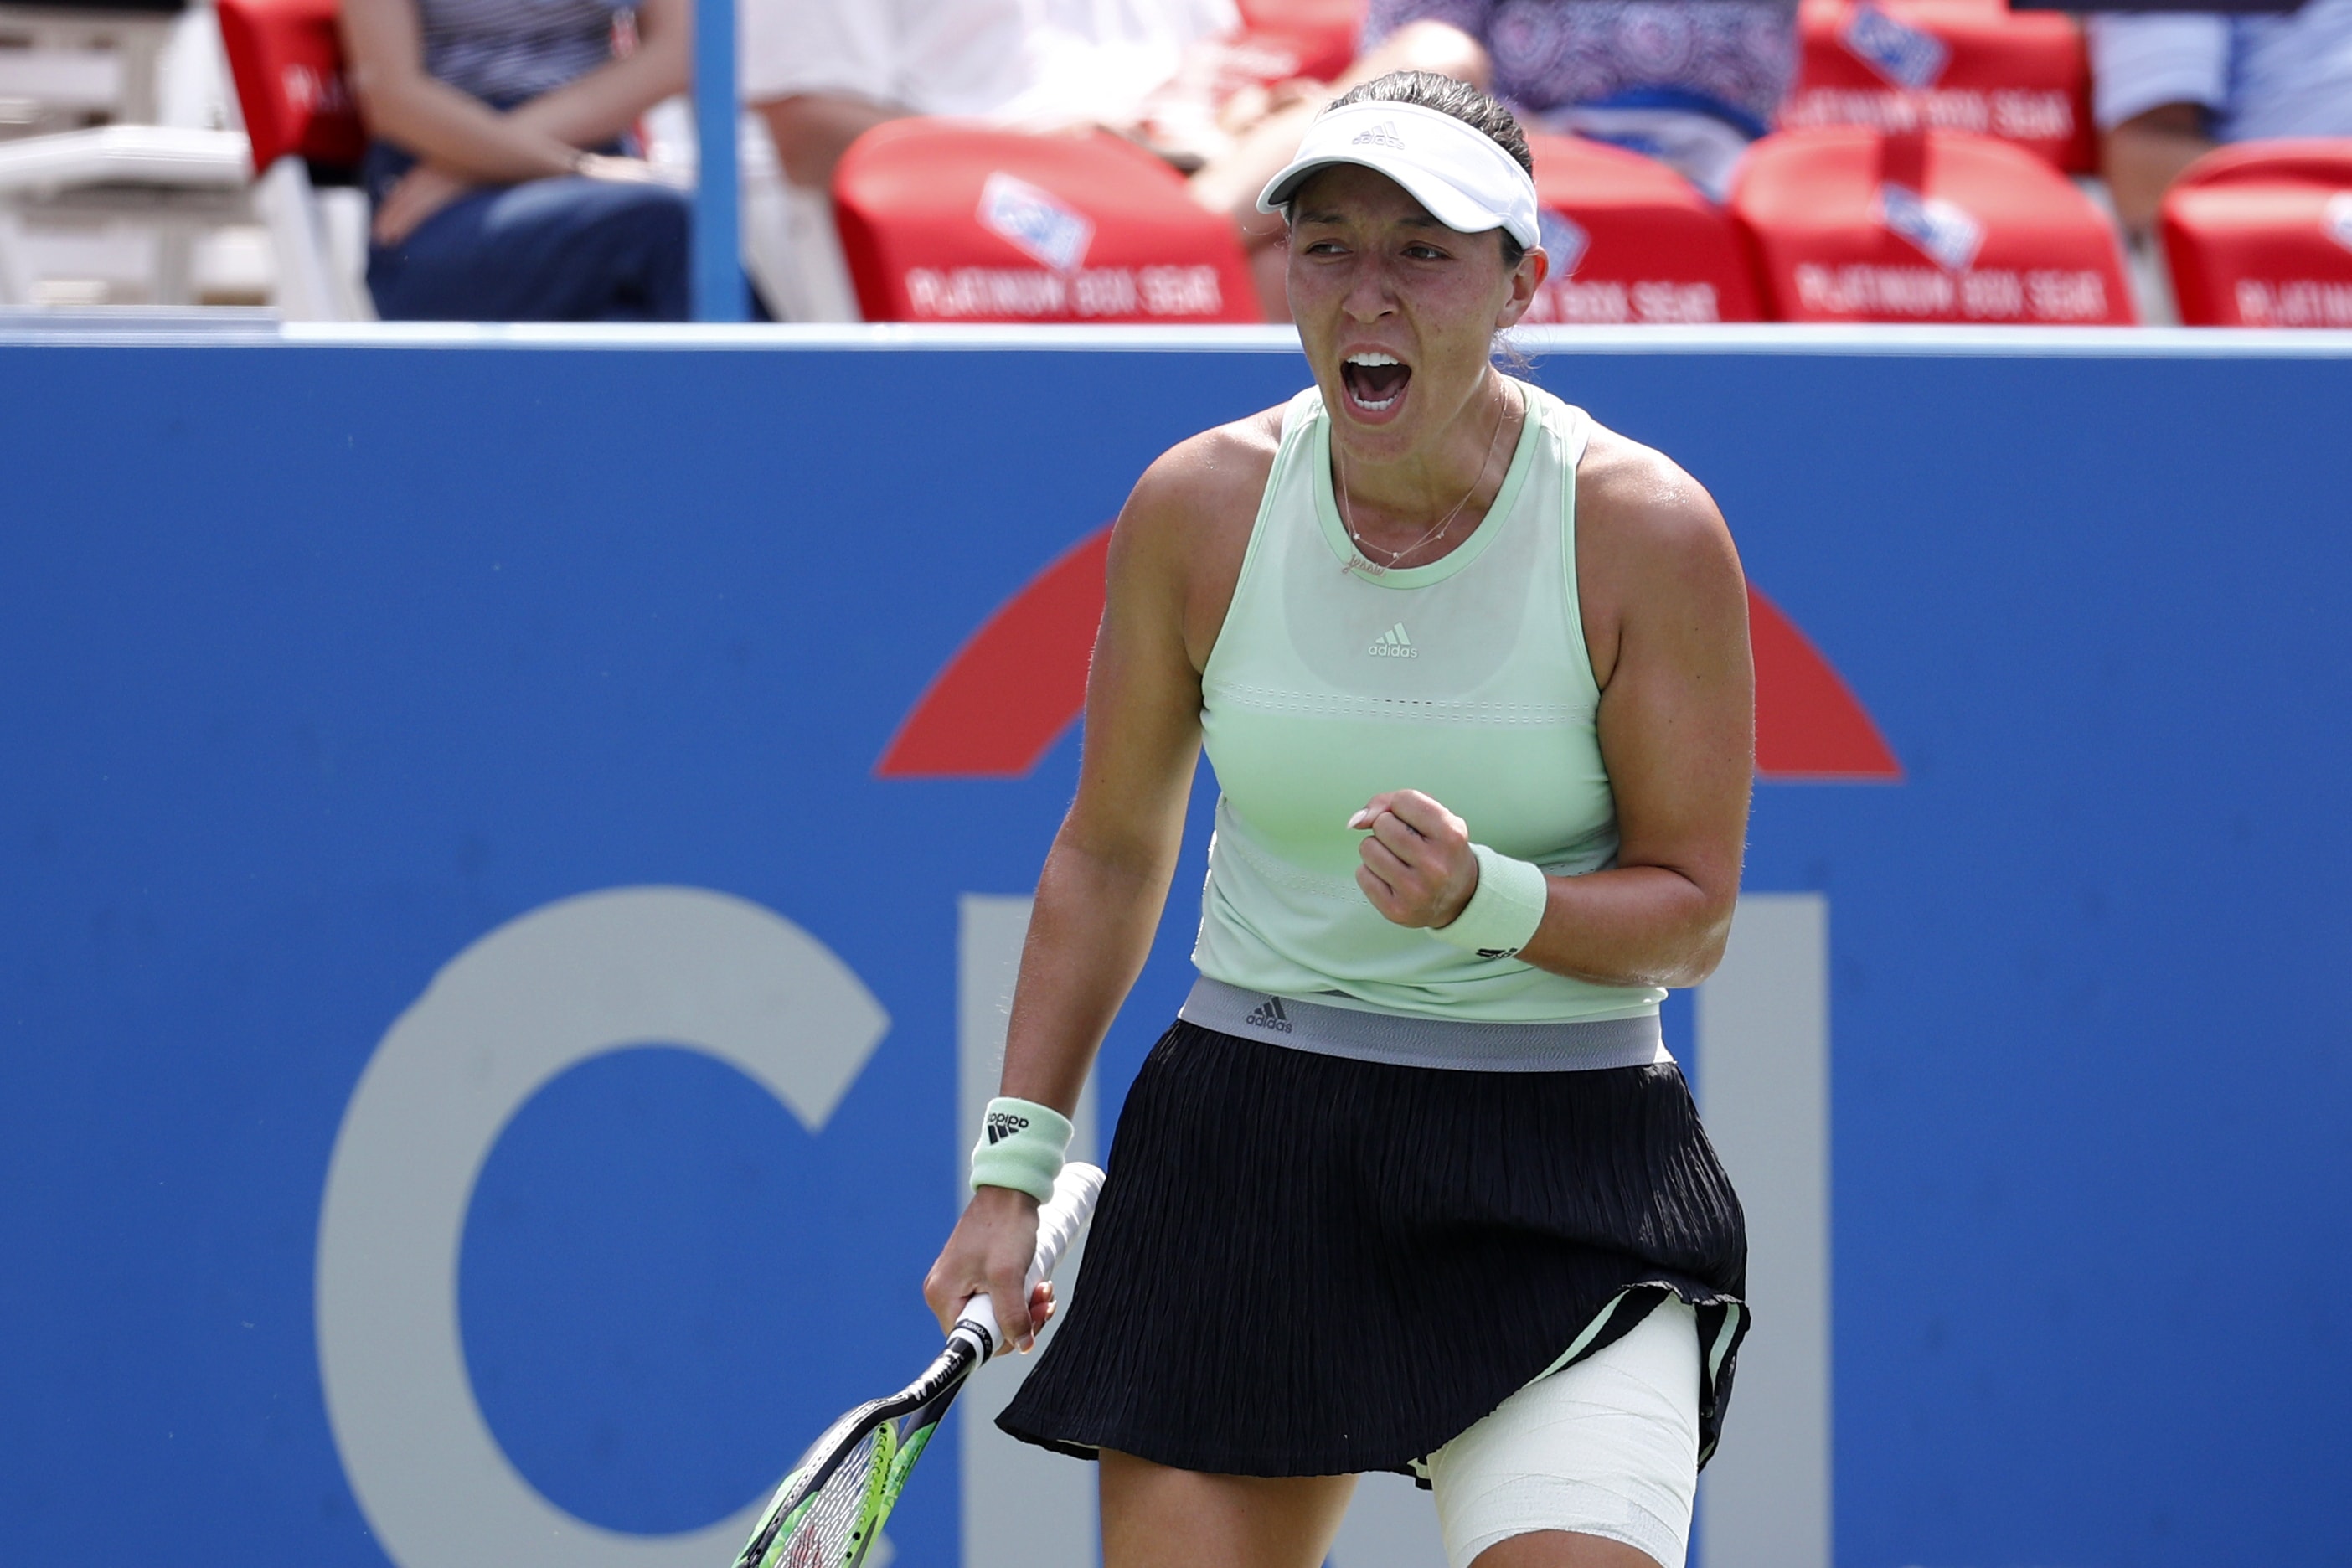 Citi Open in Washington, D.C. to return as combined event